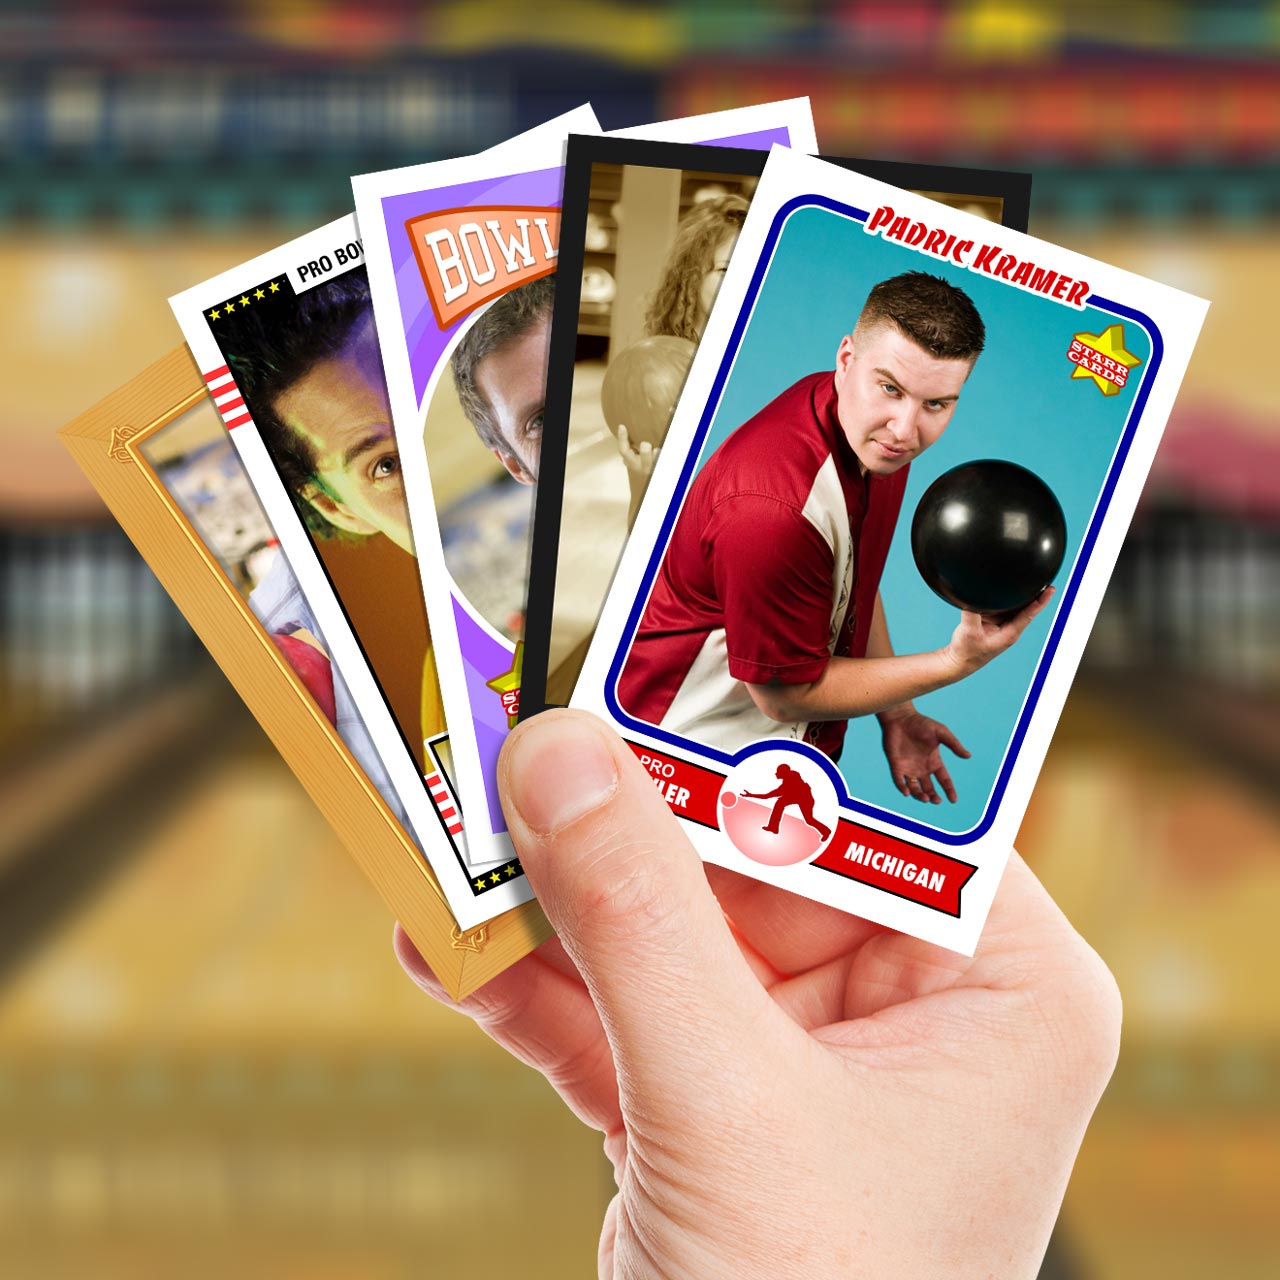 Make your own bowling card with Starr Cards.